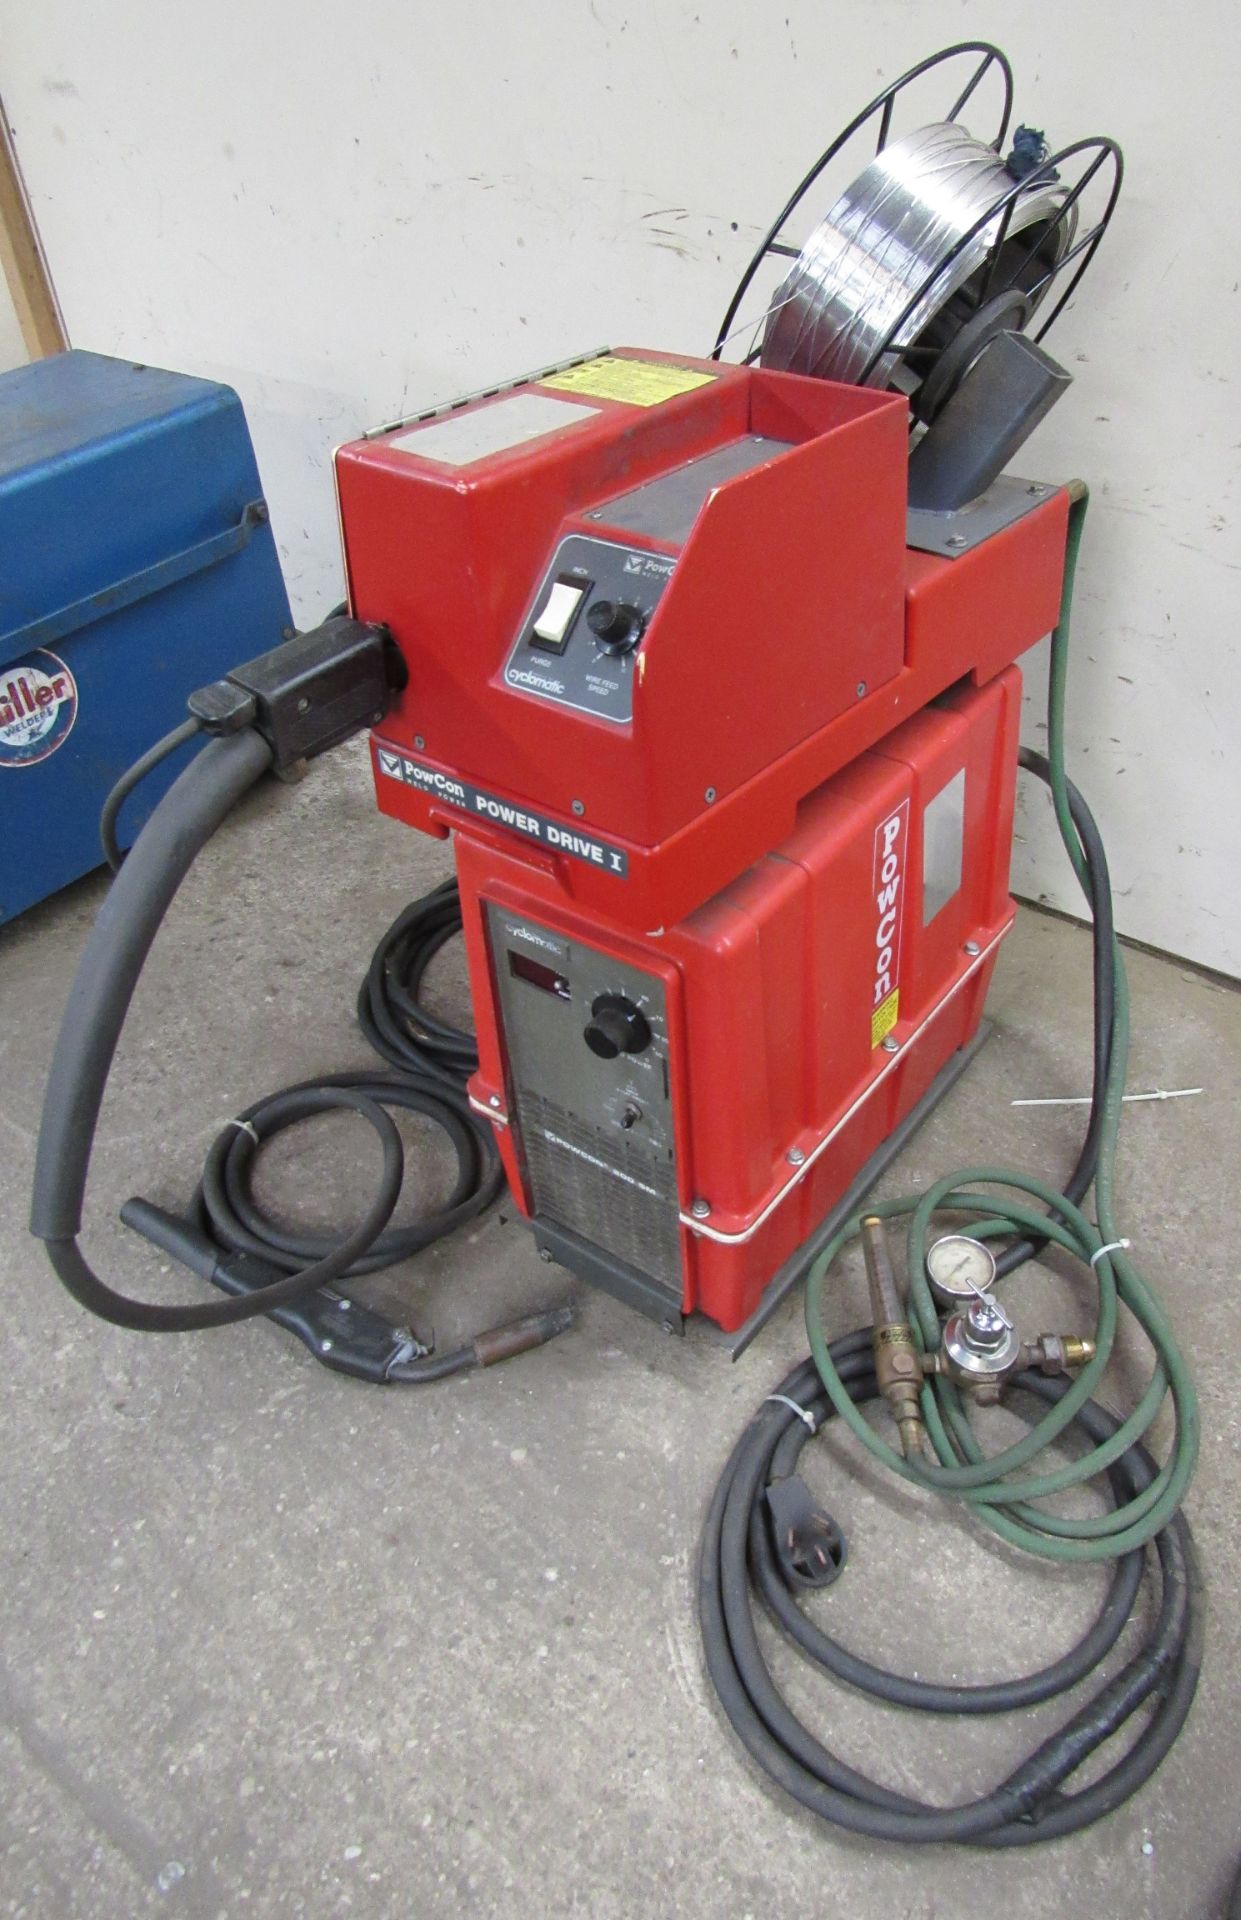 Cyclomatic Powcon 200SM Wire Feed 200 Amp Mig Welding Unit - Image 3 of 3